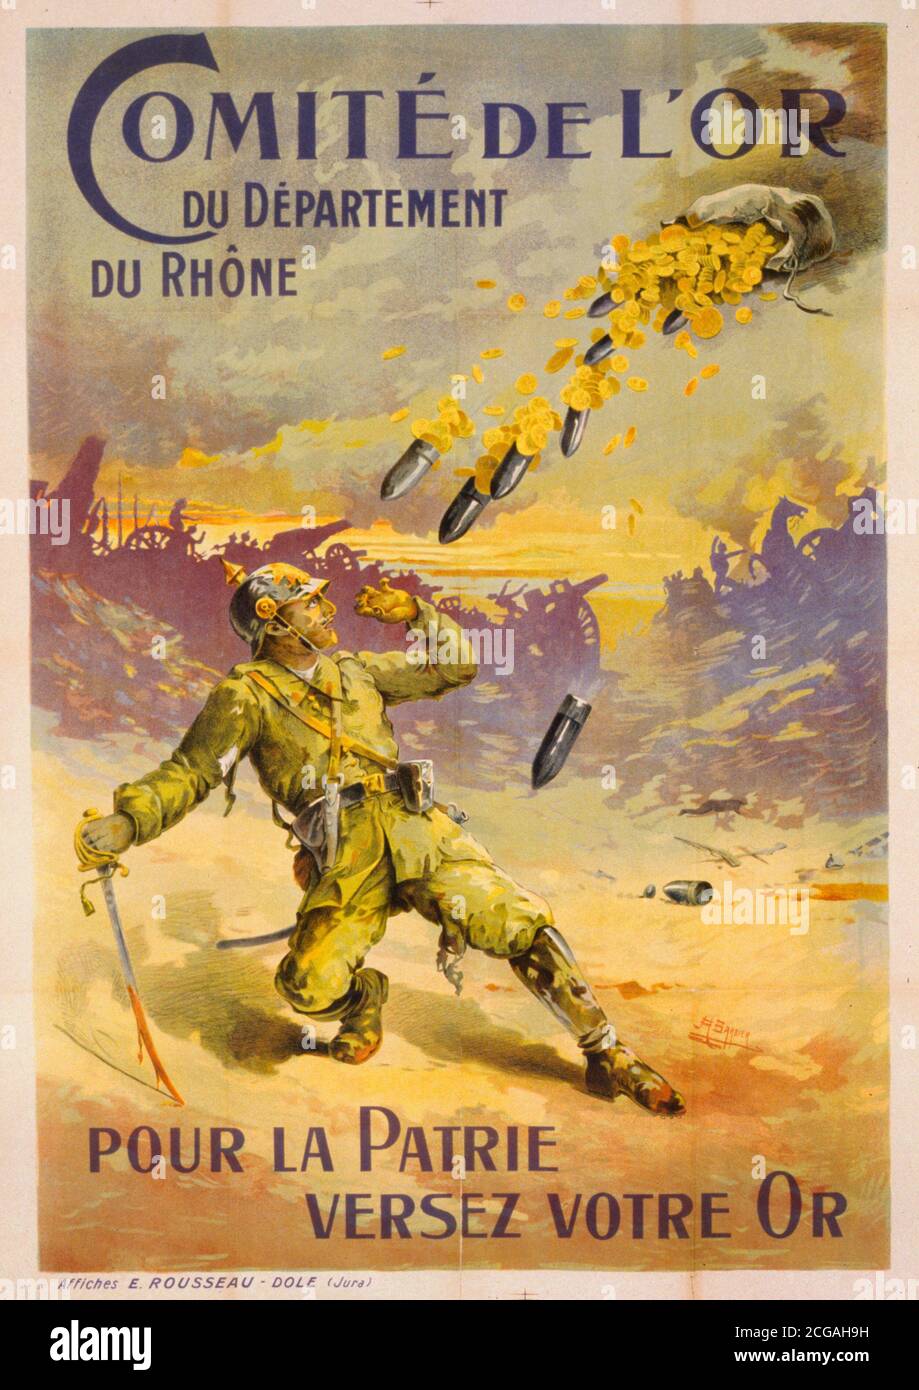 Committee for Gold of the Département du Rhone commit your gold for the homeland.Shells and gold coins heading towards a German soldier on the battlefield. In 1914, the French were 'invited' to exchange their gold for paper. Gold was needed to pay for foreign imports. 1915 Stock Photo